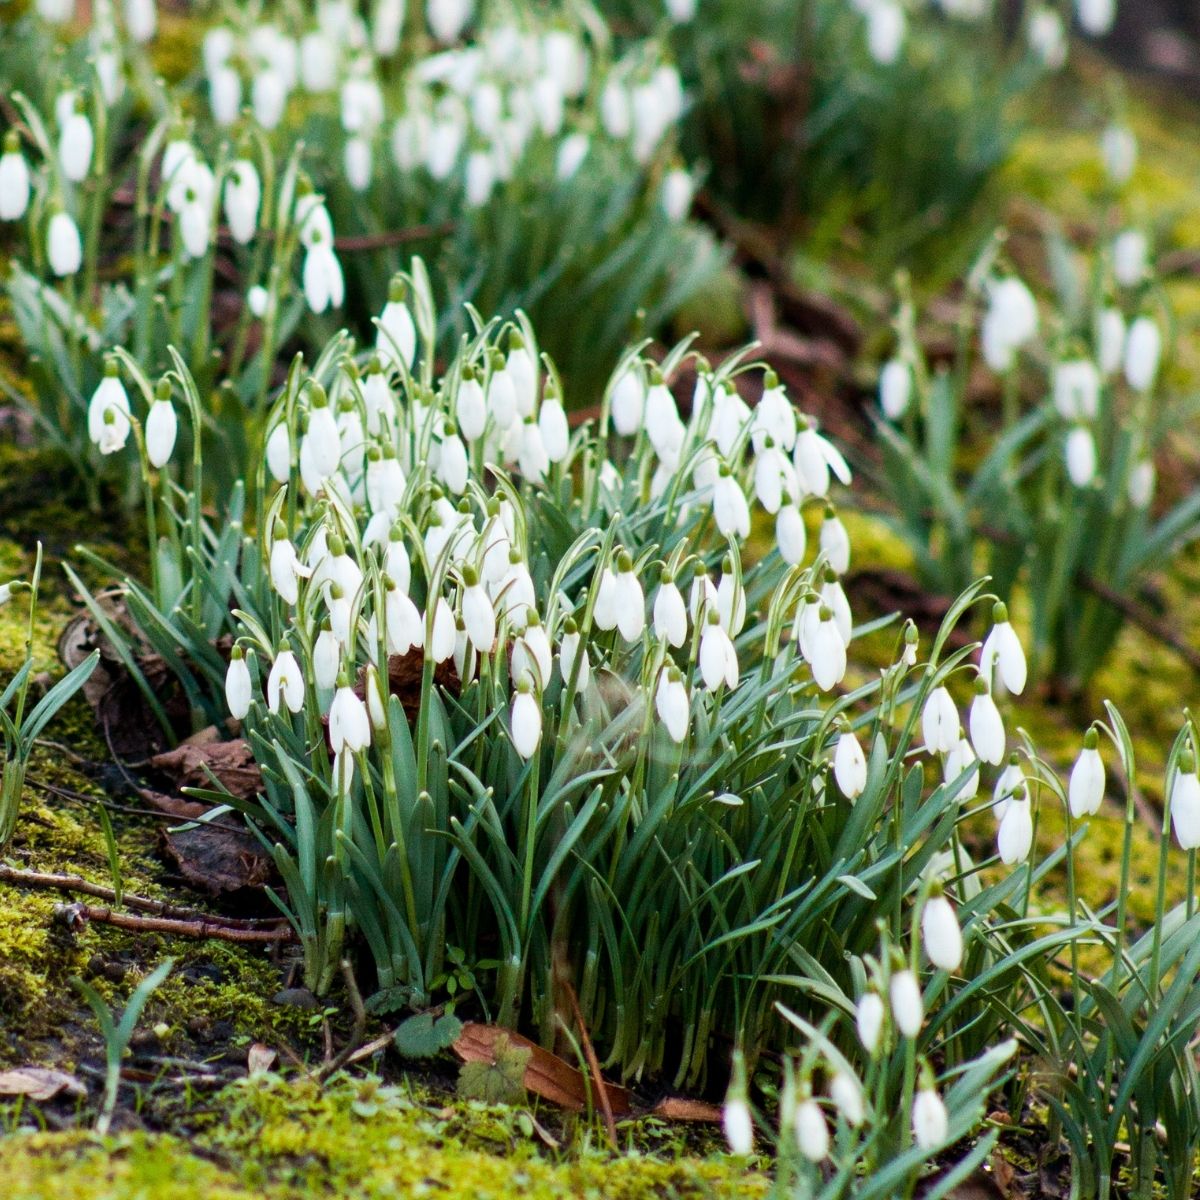 snowdrops in bloom